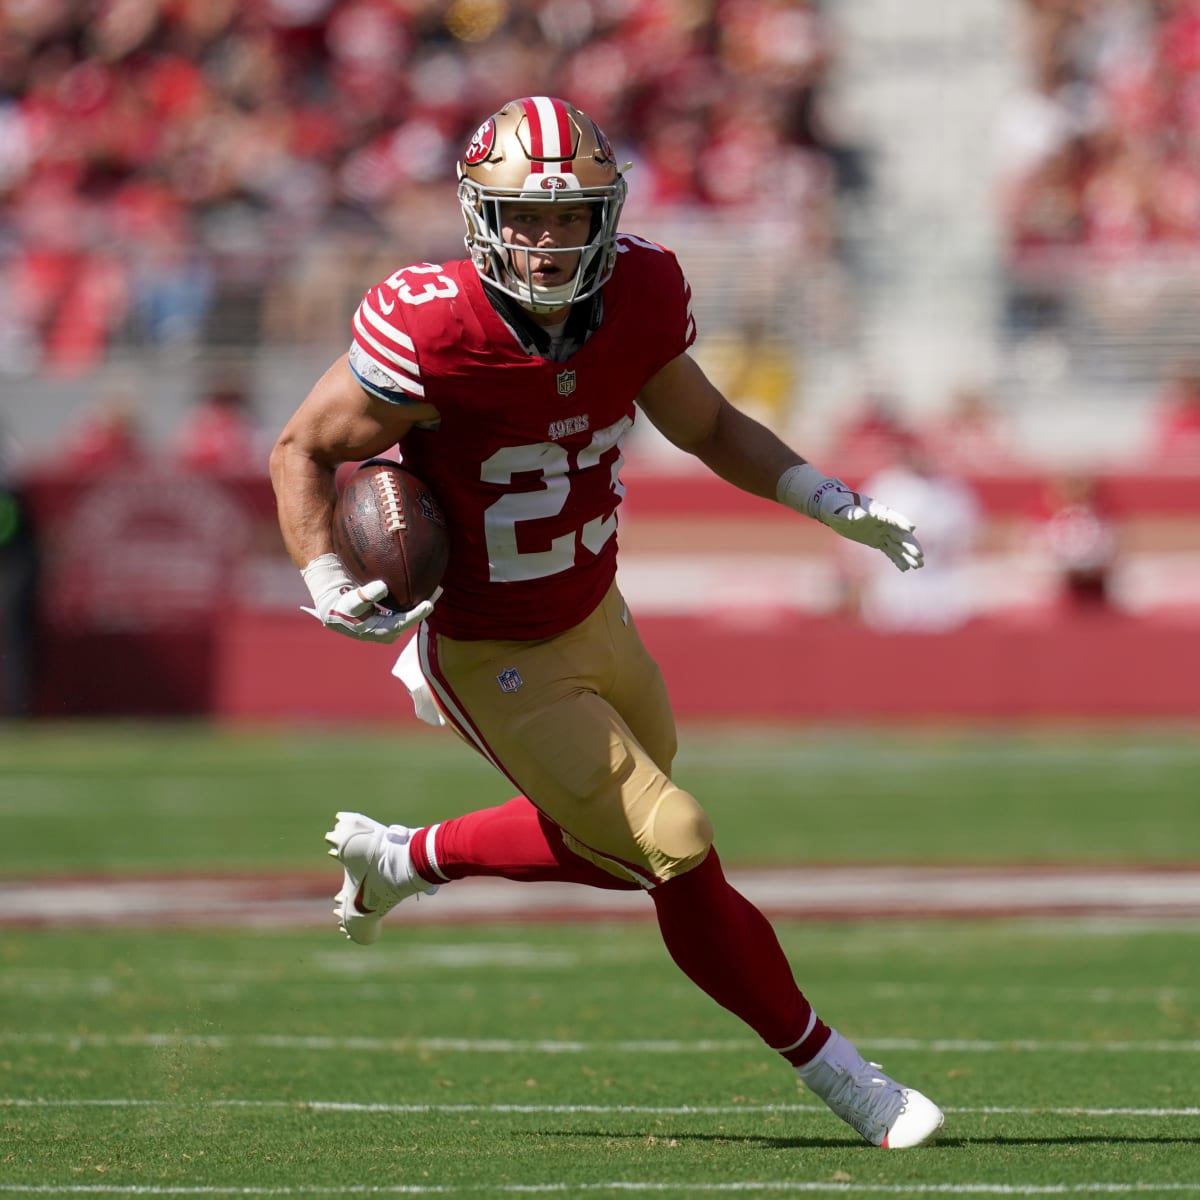 McCaffrey scores 4 TDs to lead the 49ers past the Cardinals 35-16